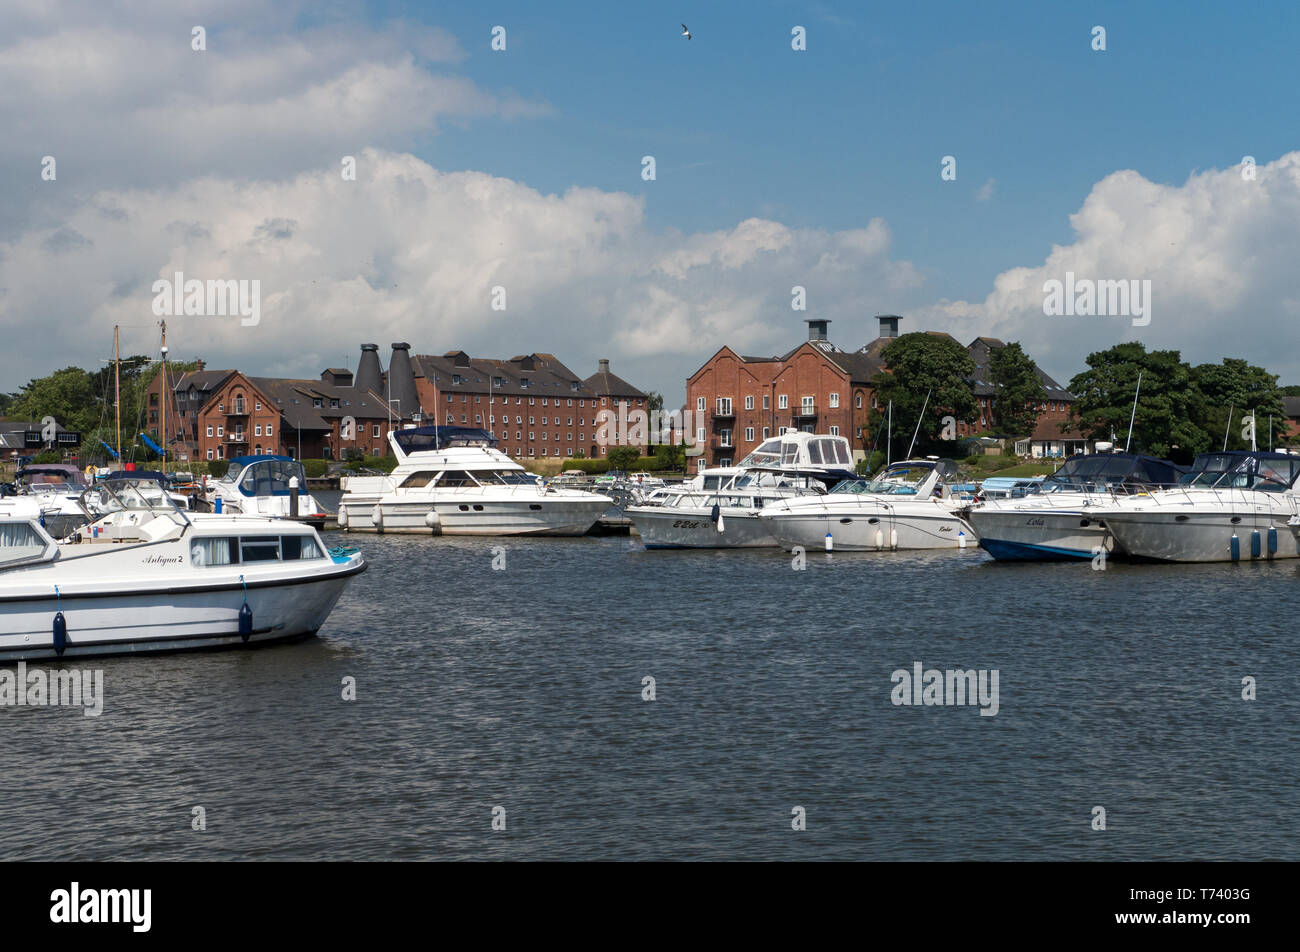 Oulton Broad, the southern gateway to the Broads National Park, Lowestoft, Suffolk, England, UK, Stock Photo